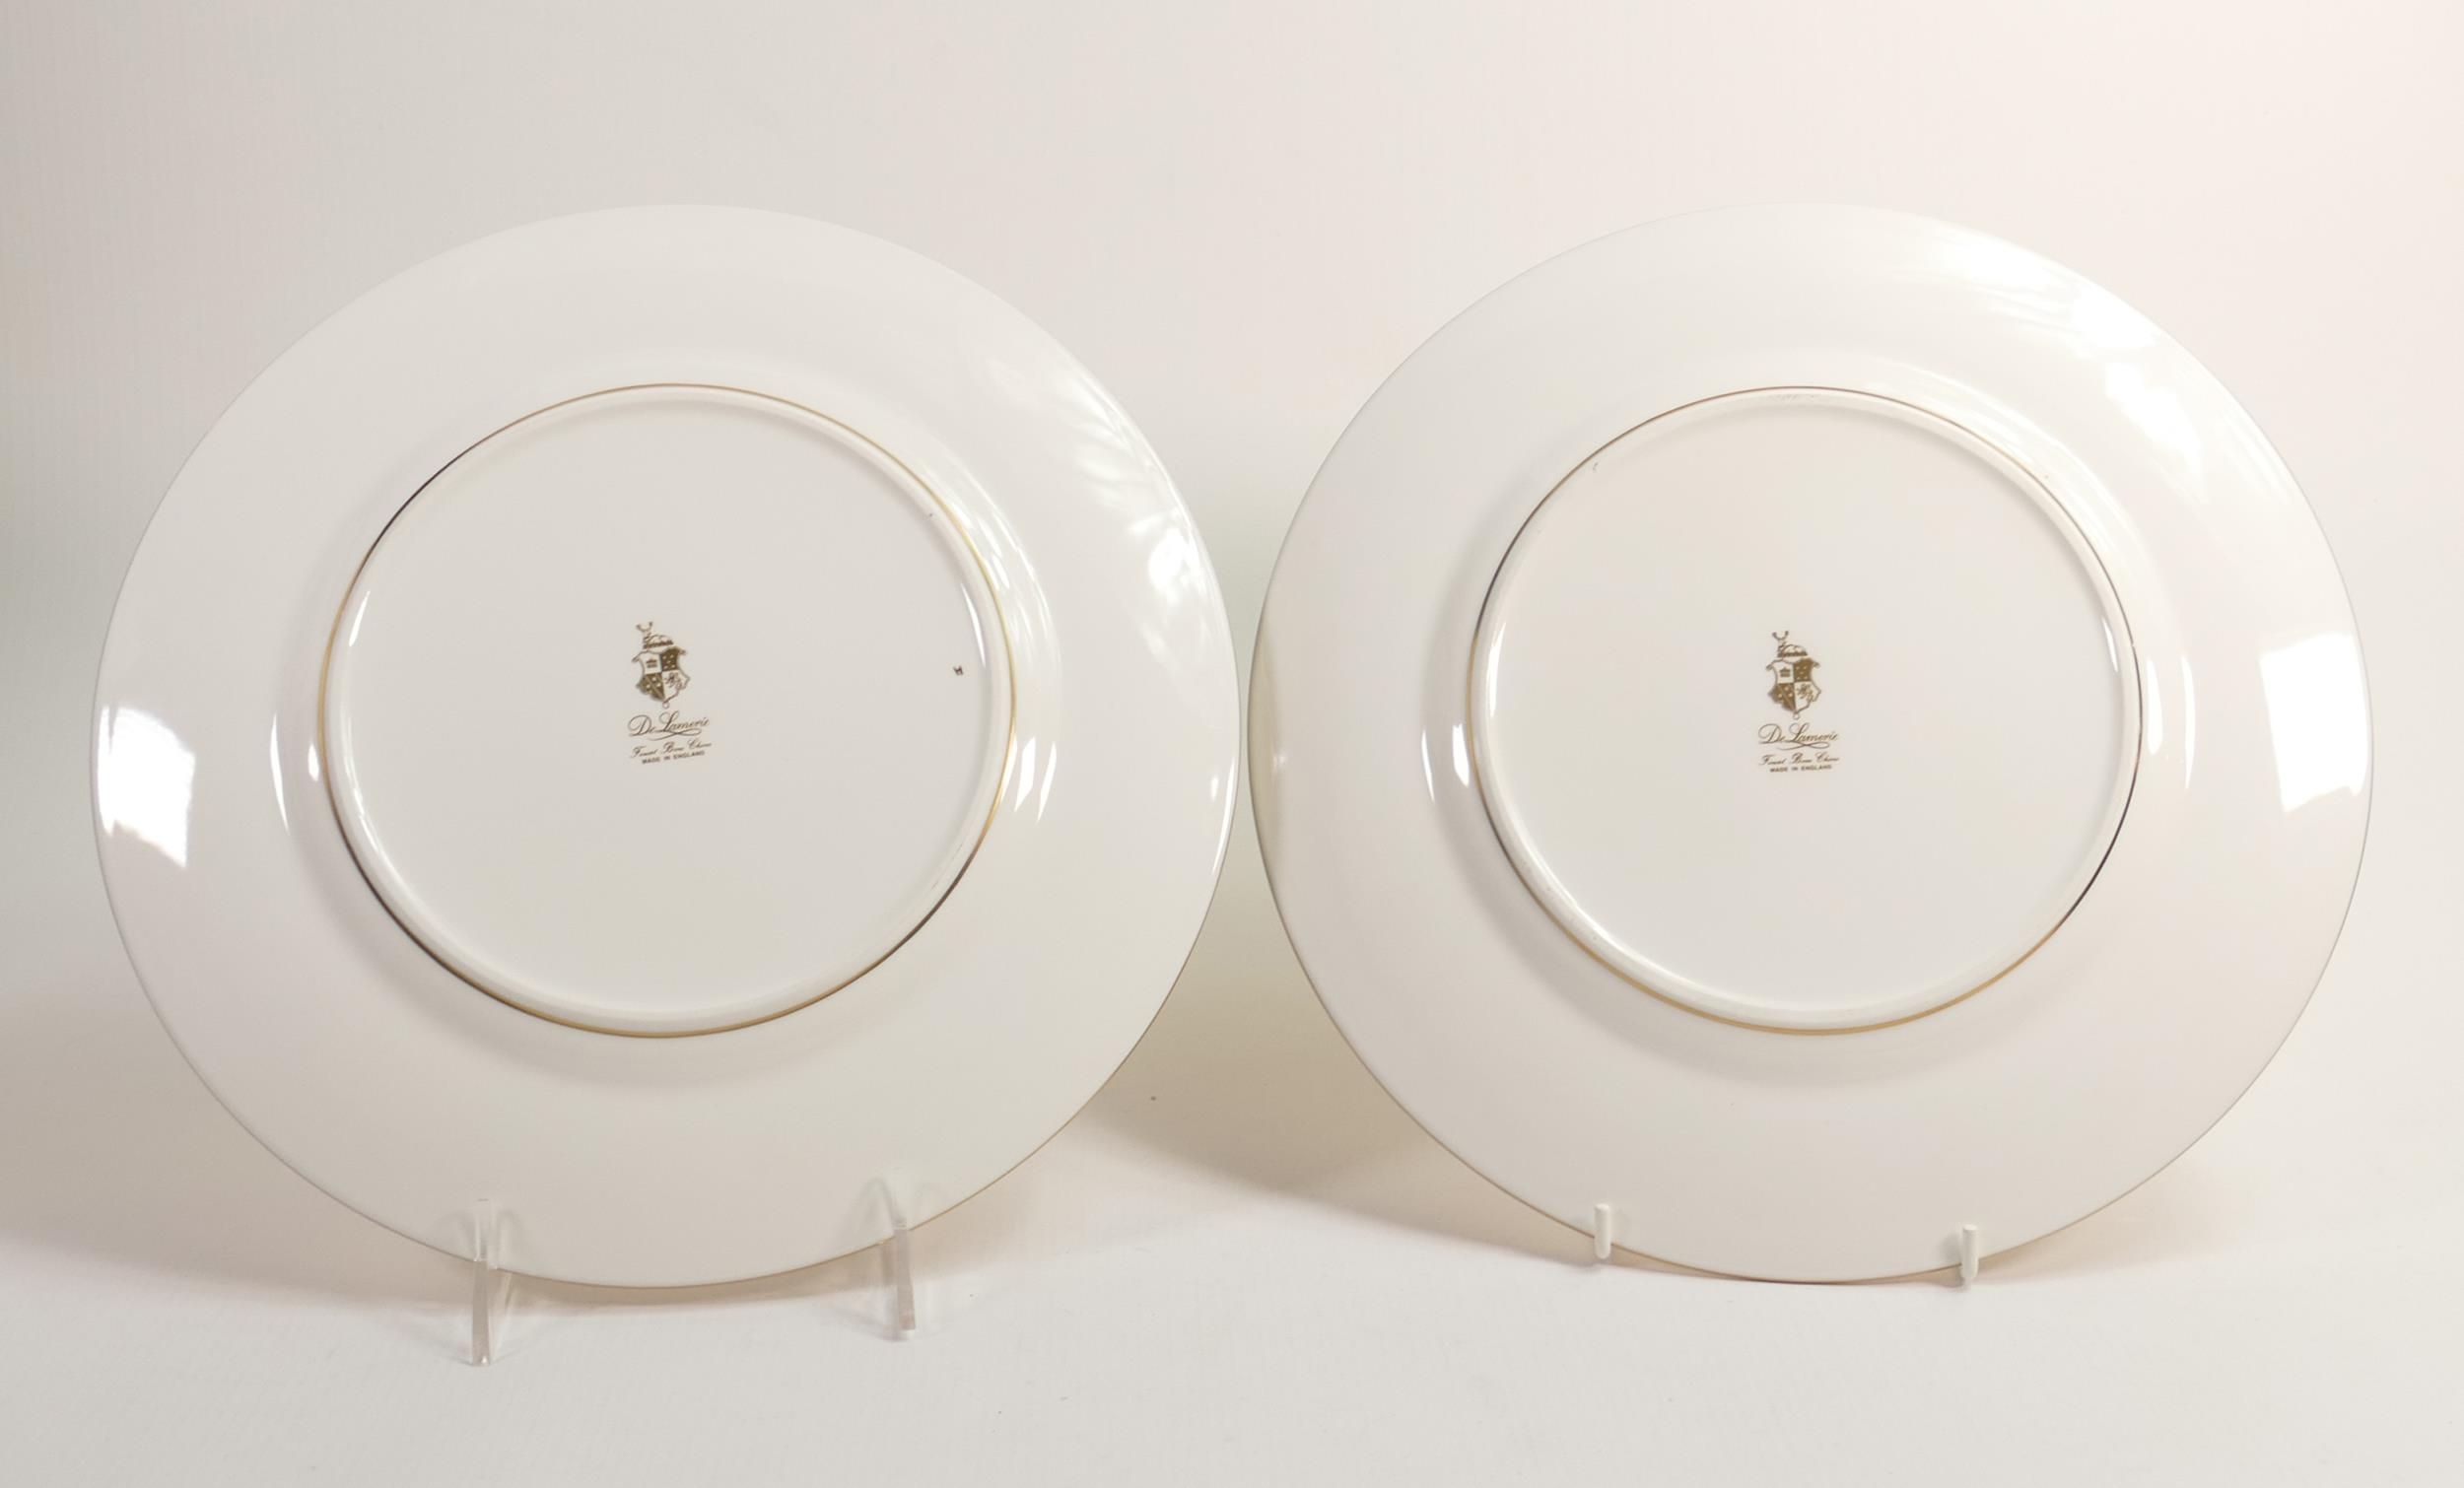 De Lamerie Fine Bone China Renaissance Patterned Dinner Plates , specially made high end quality - Image 2 of 3